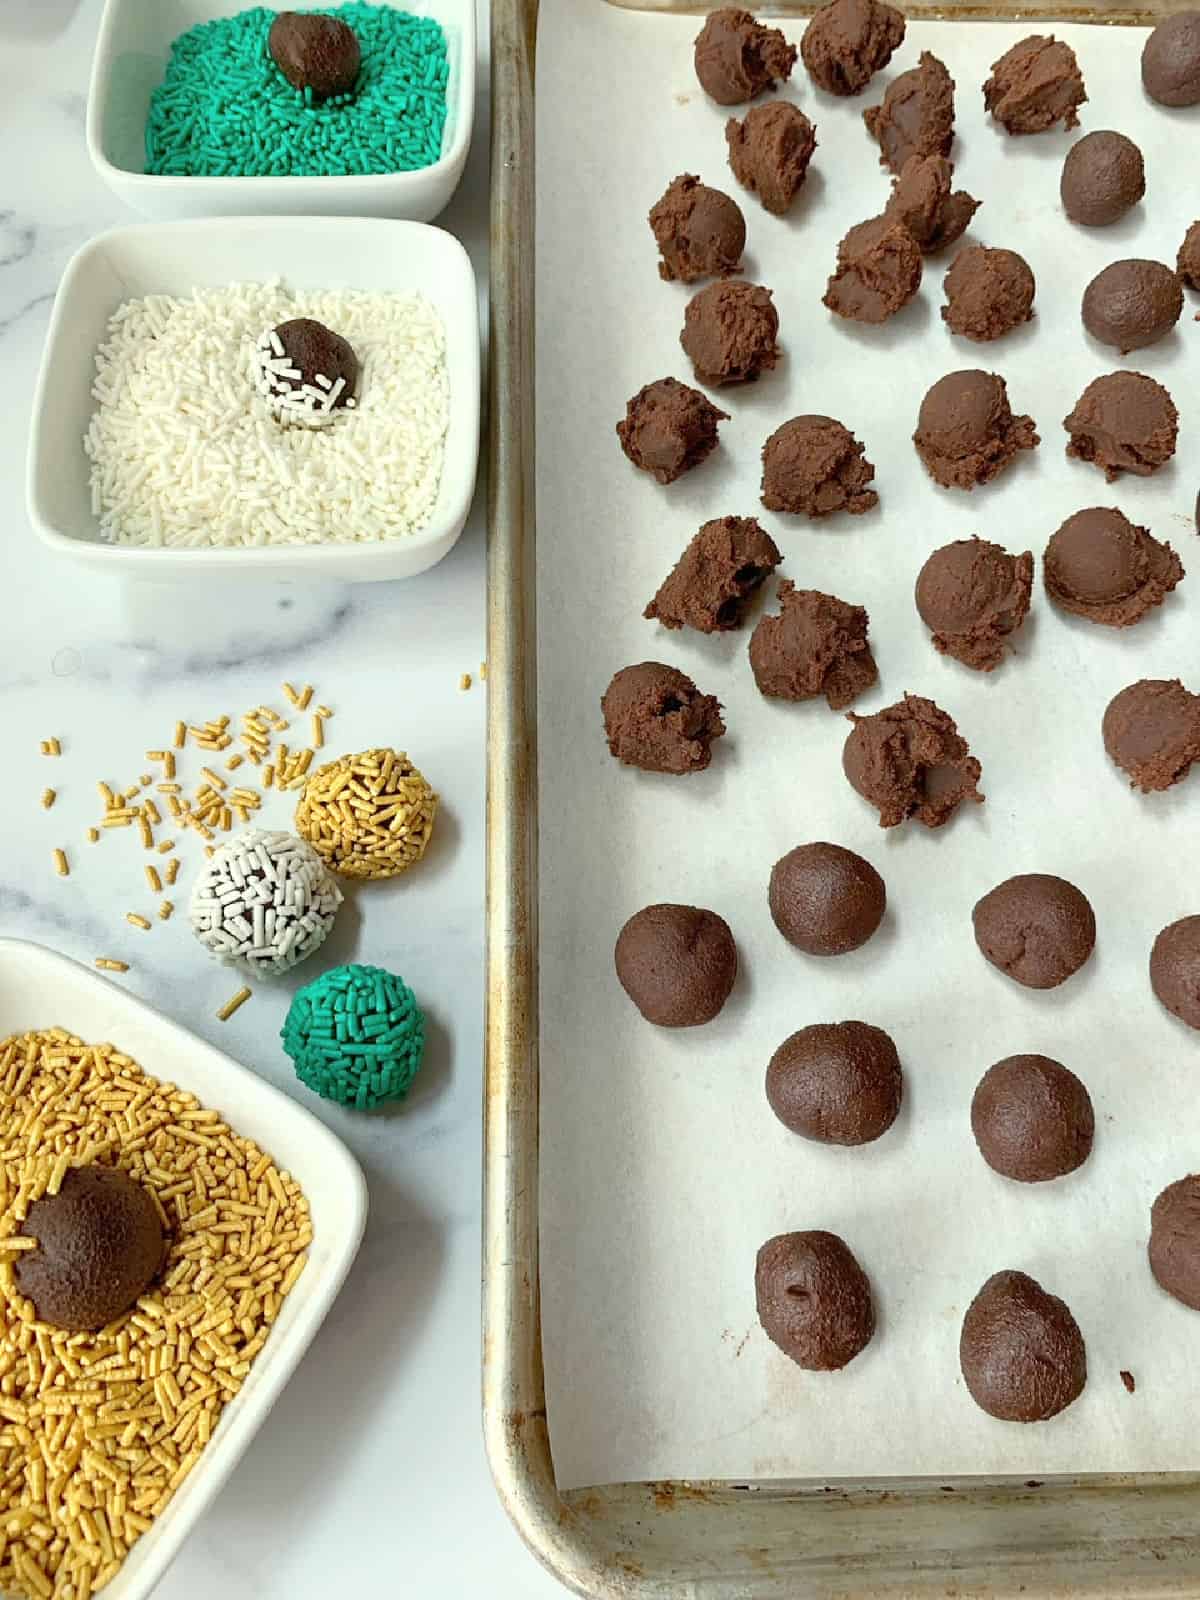 A sheet pan with chocolate ganache balls, and chocolate in sprinkles.